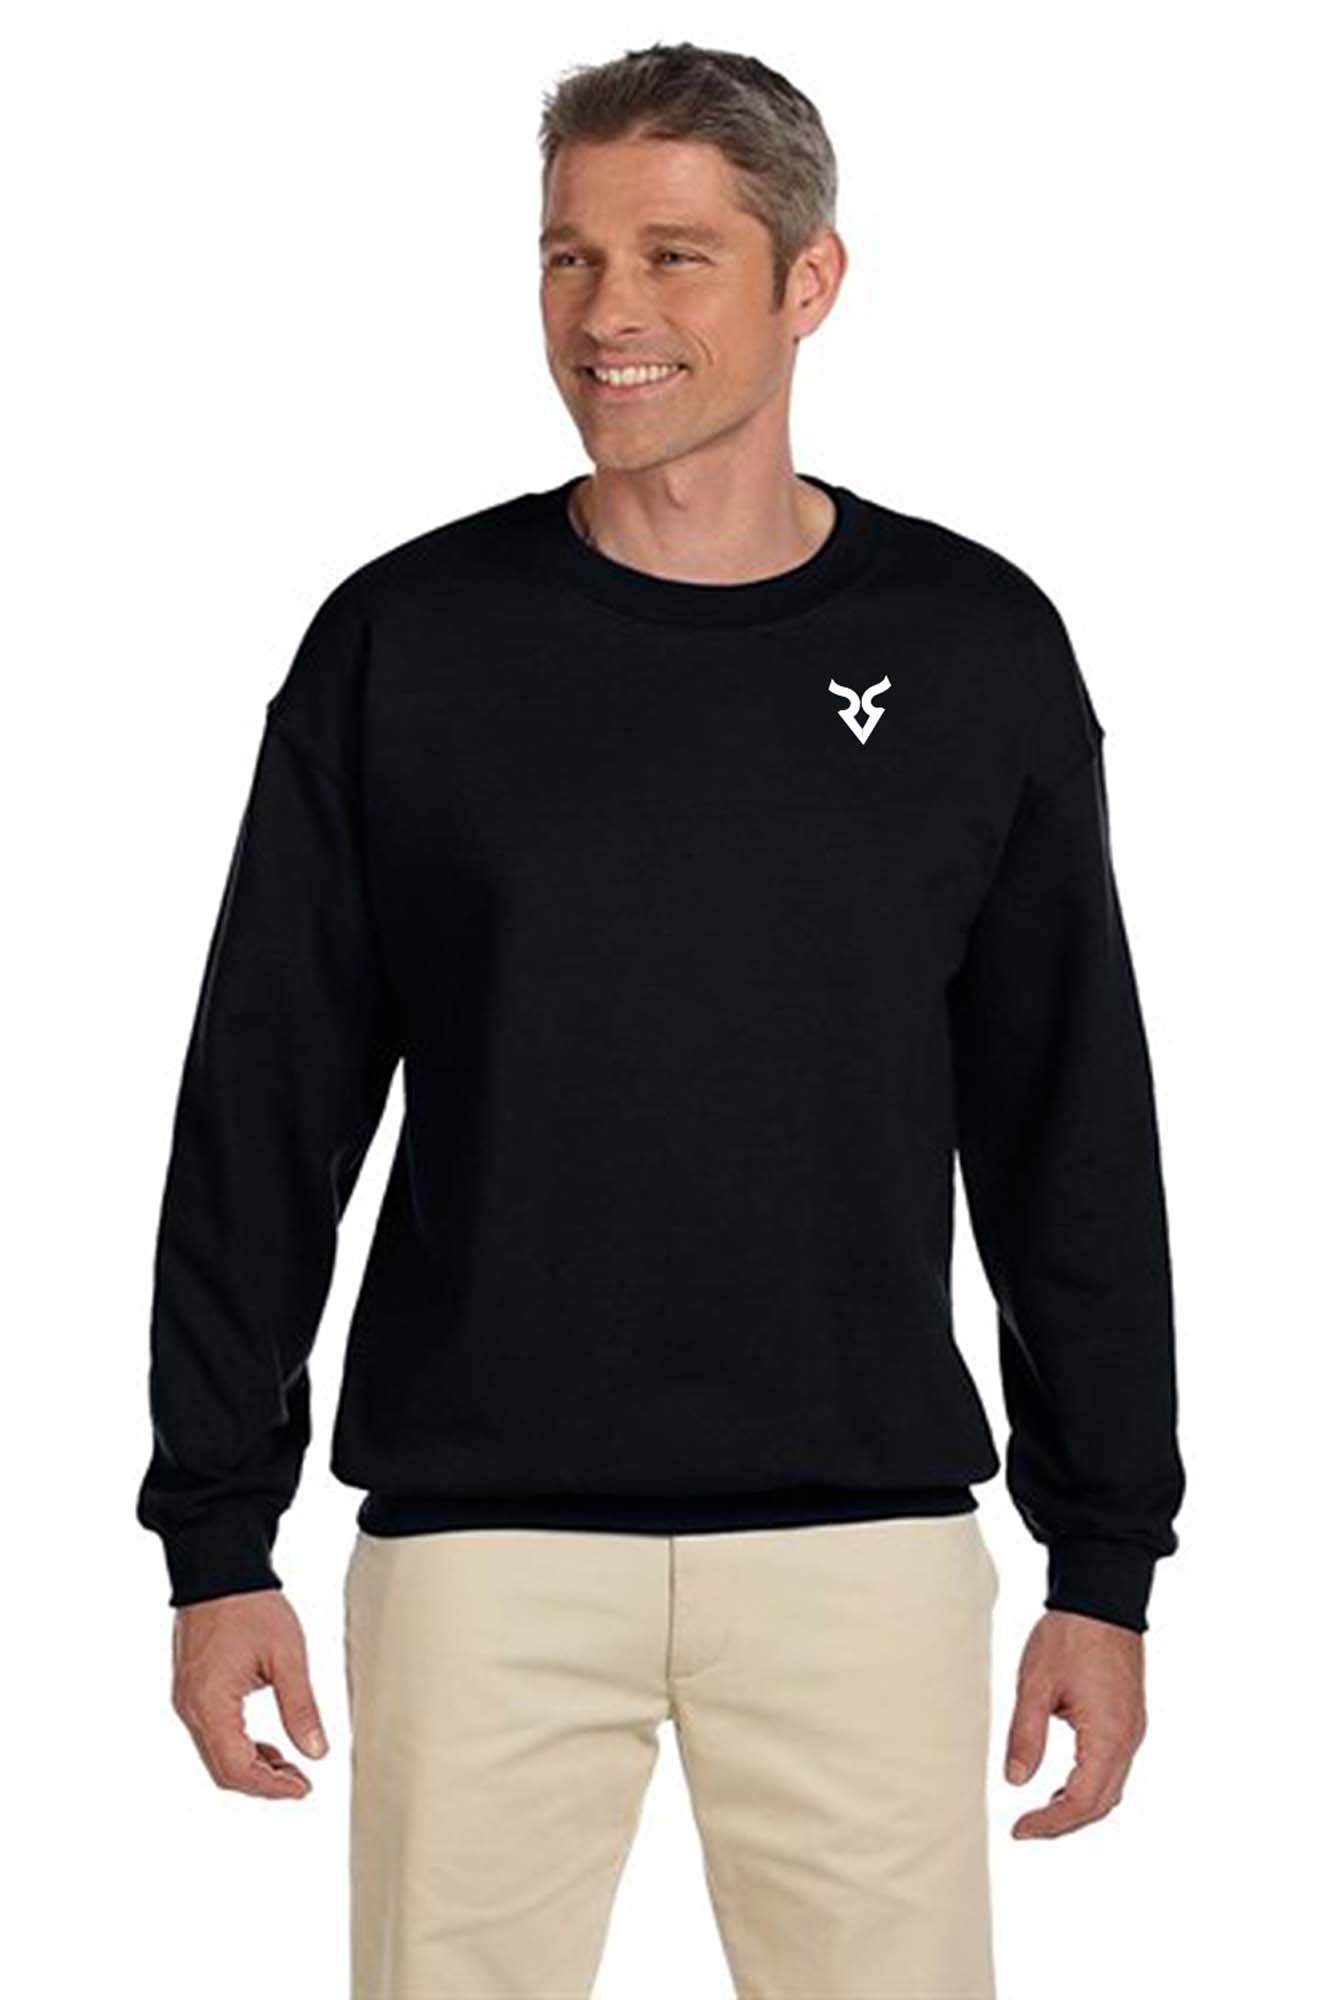 Evolution of the Goat Crew Neck Long Sleeves